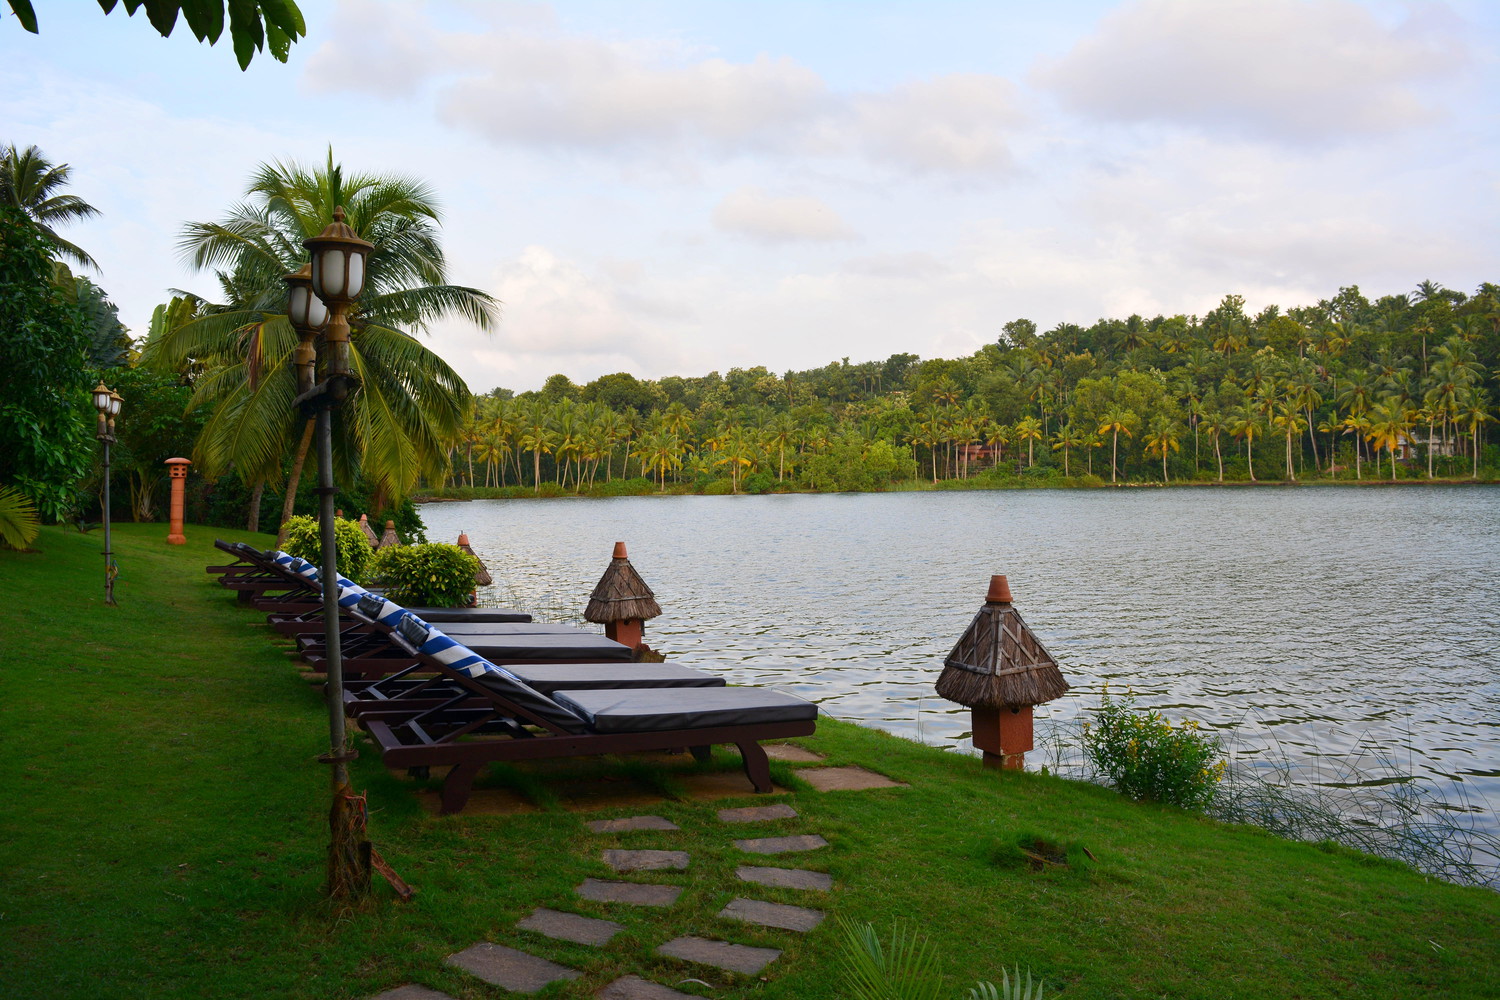 Deckchairs on a lawn beside a lake with coconut palm trees in the background